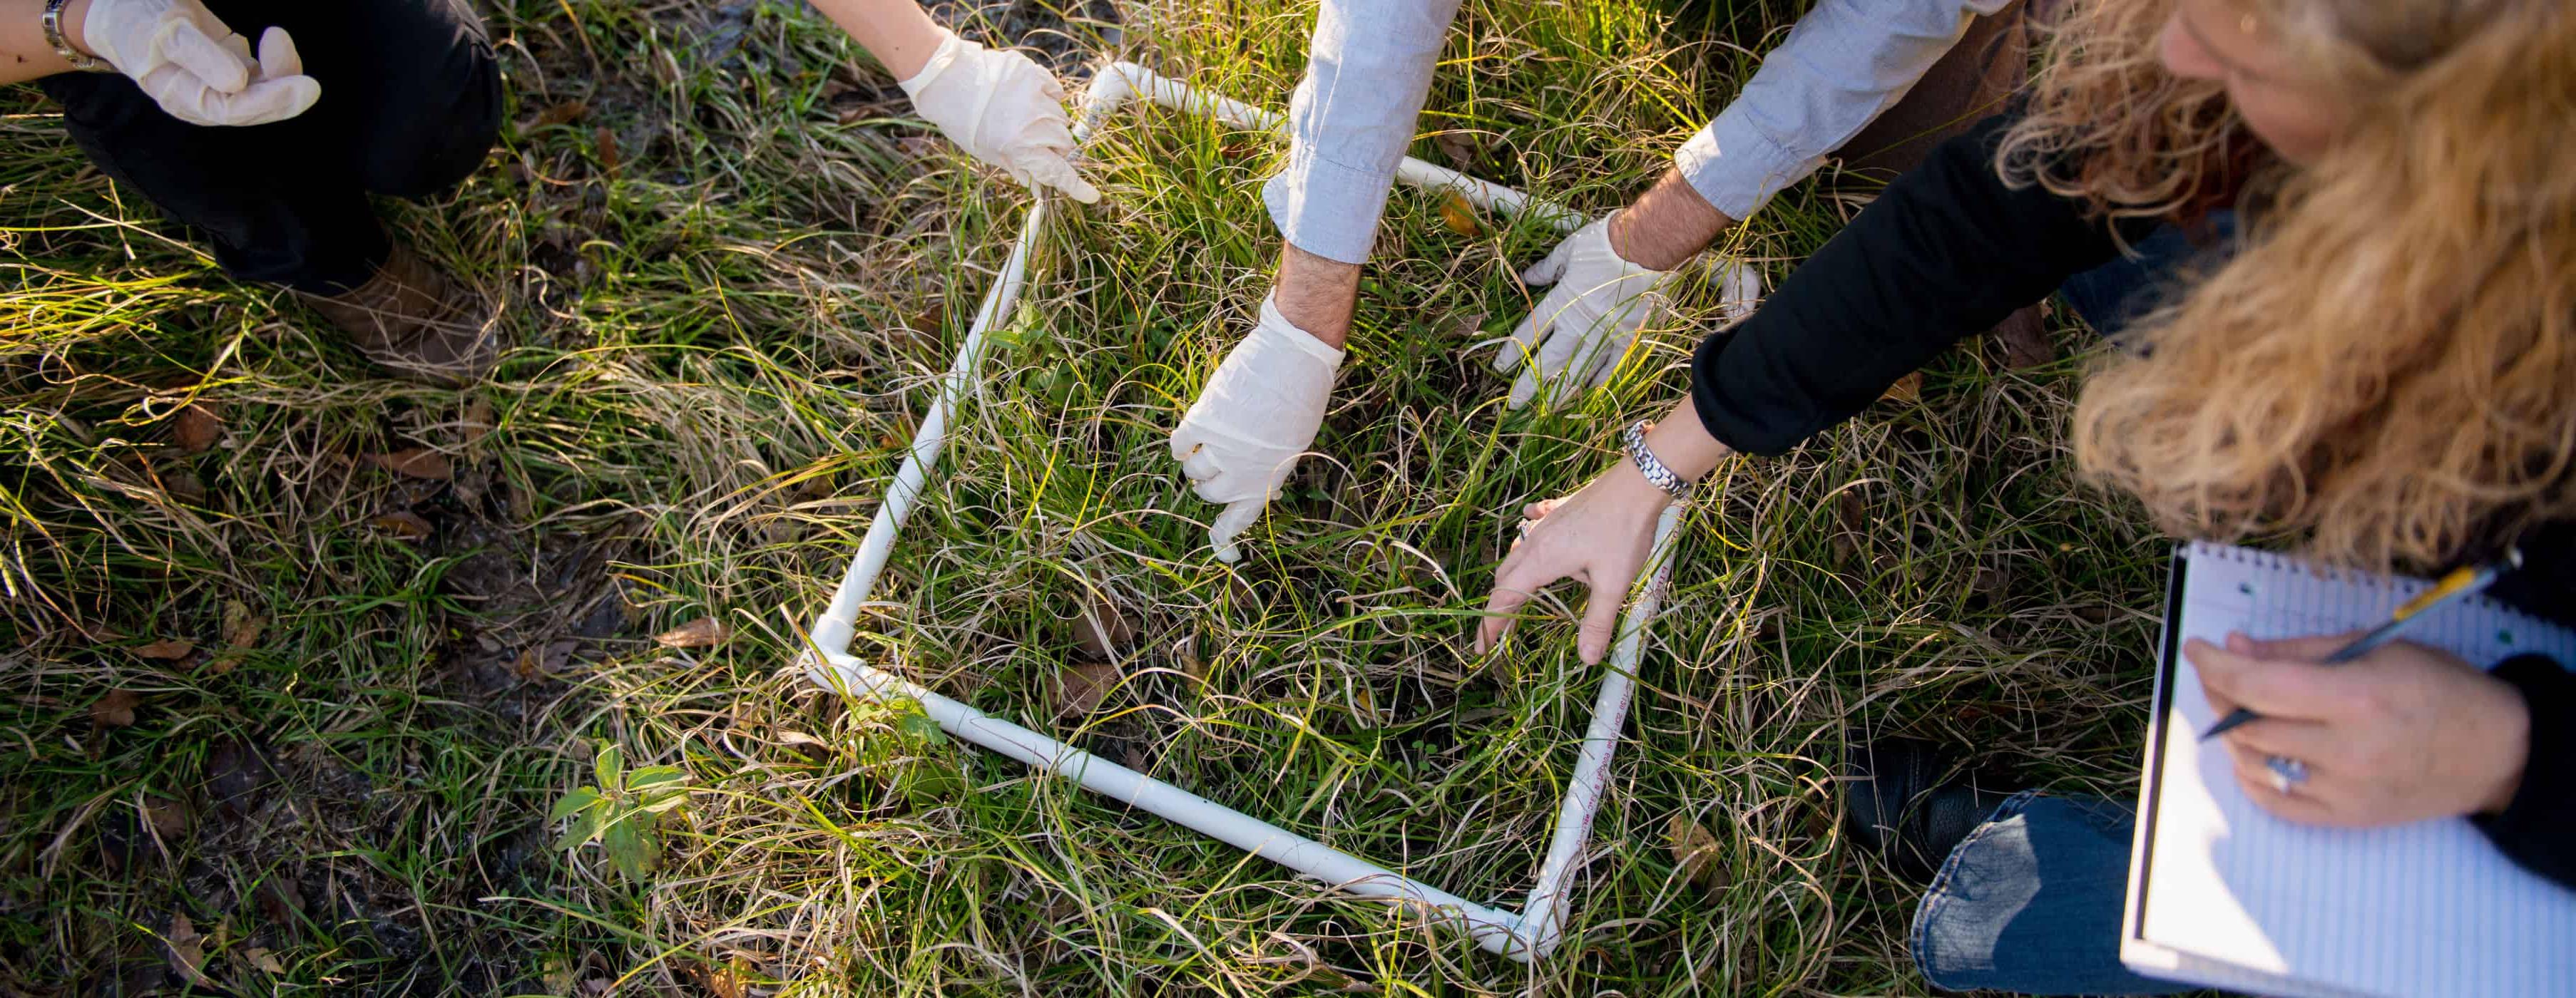 Students taking sample of grass